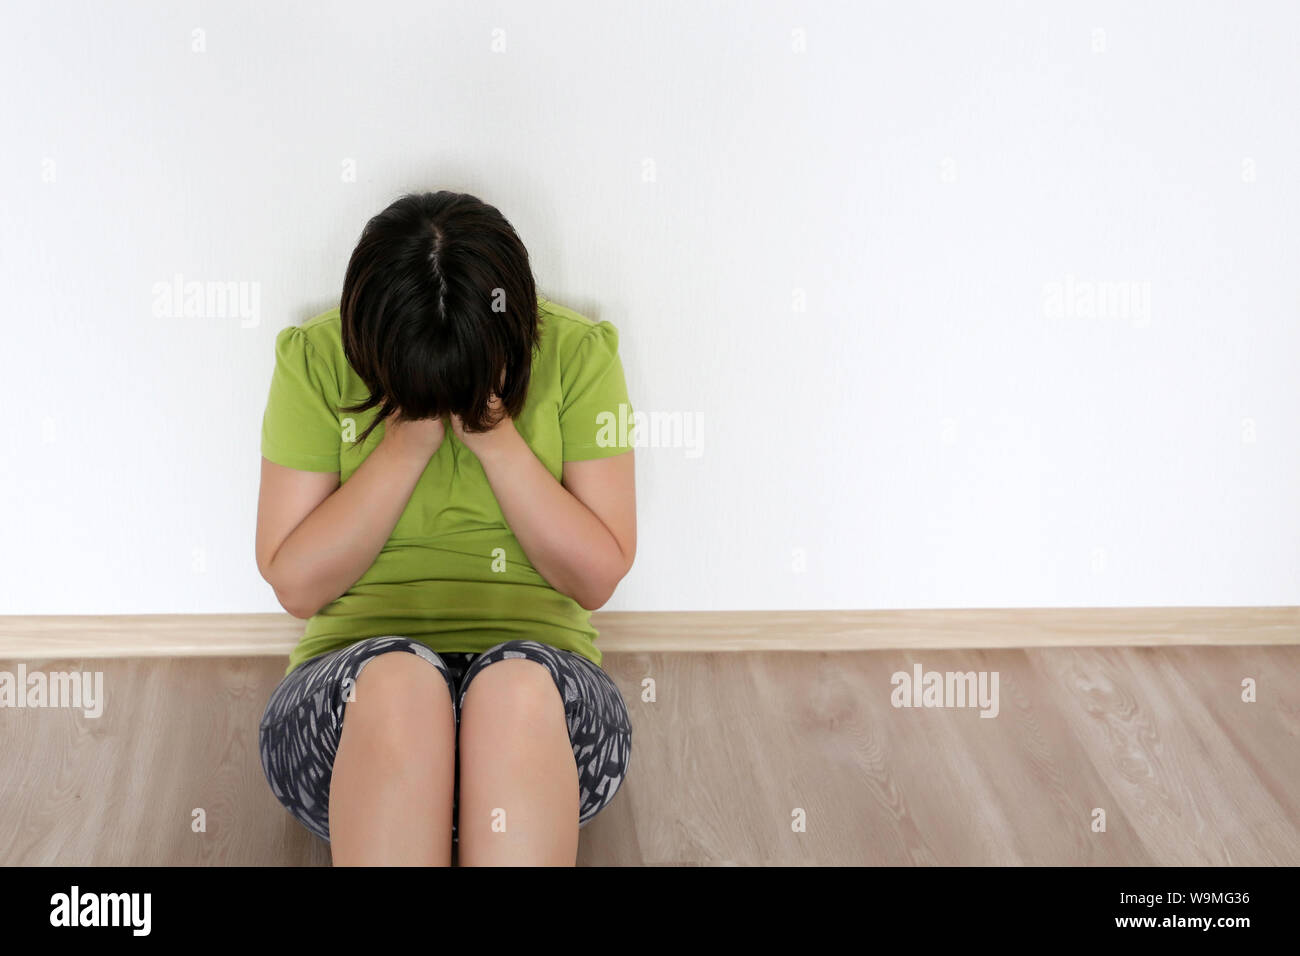 Upset girl sitting on the floor in the room, covering her face with hands. Concept of domestic violence, tragedy, crying woman Stock Photo